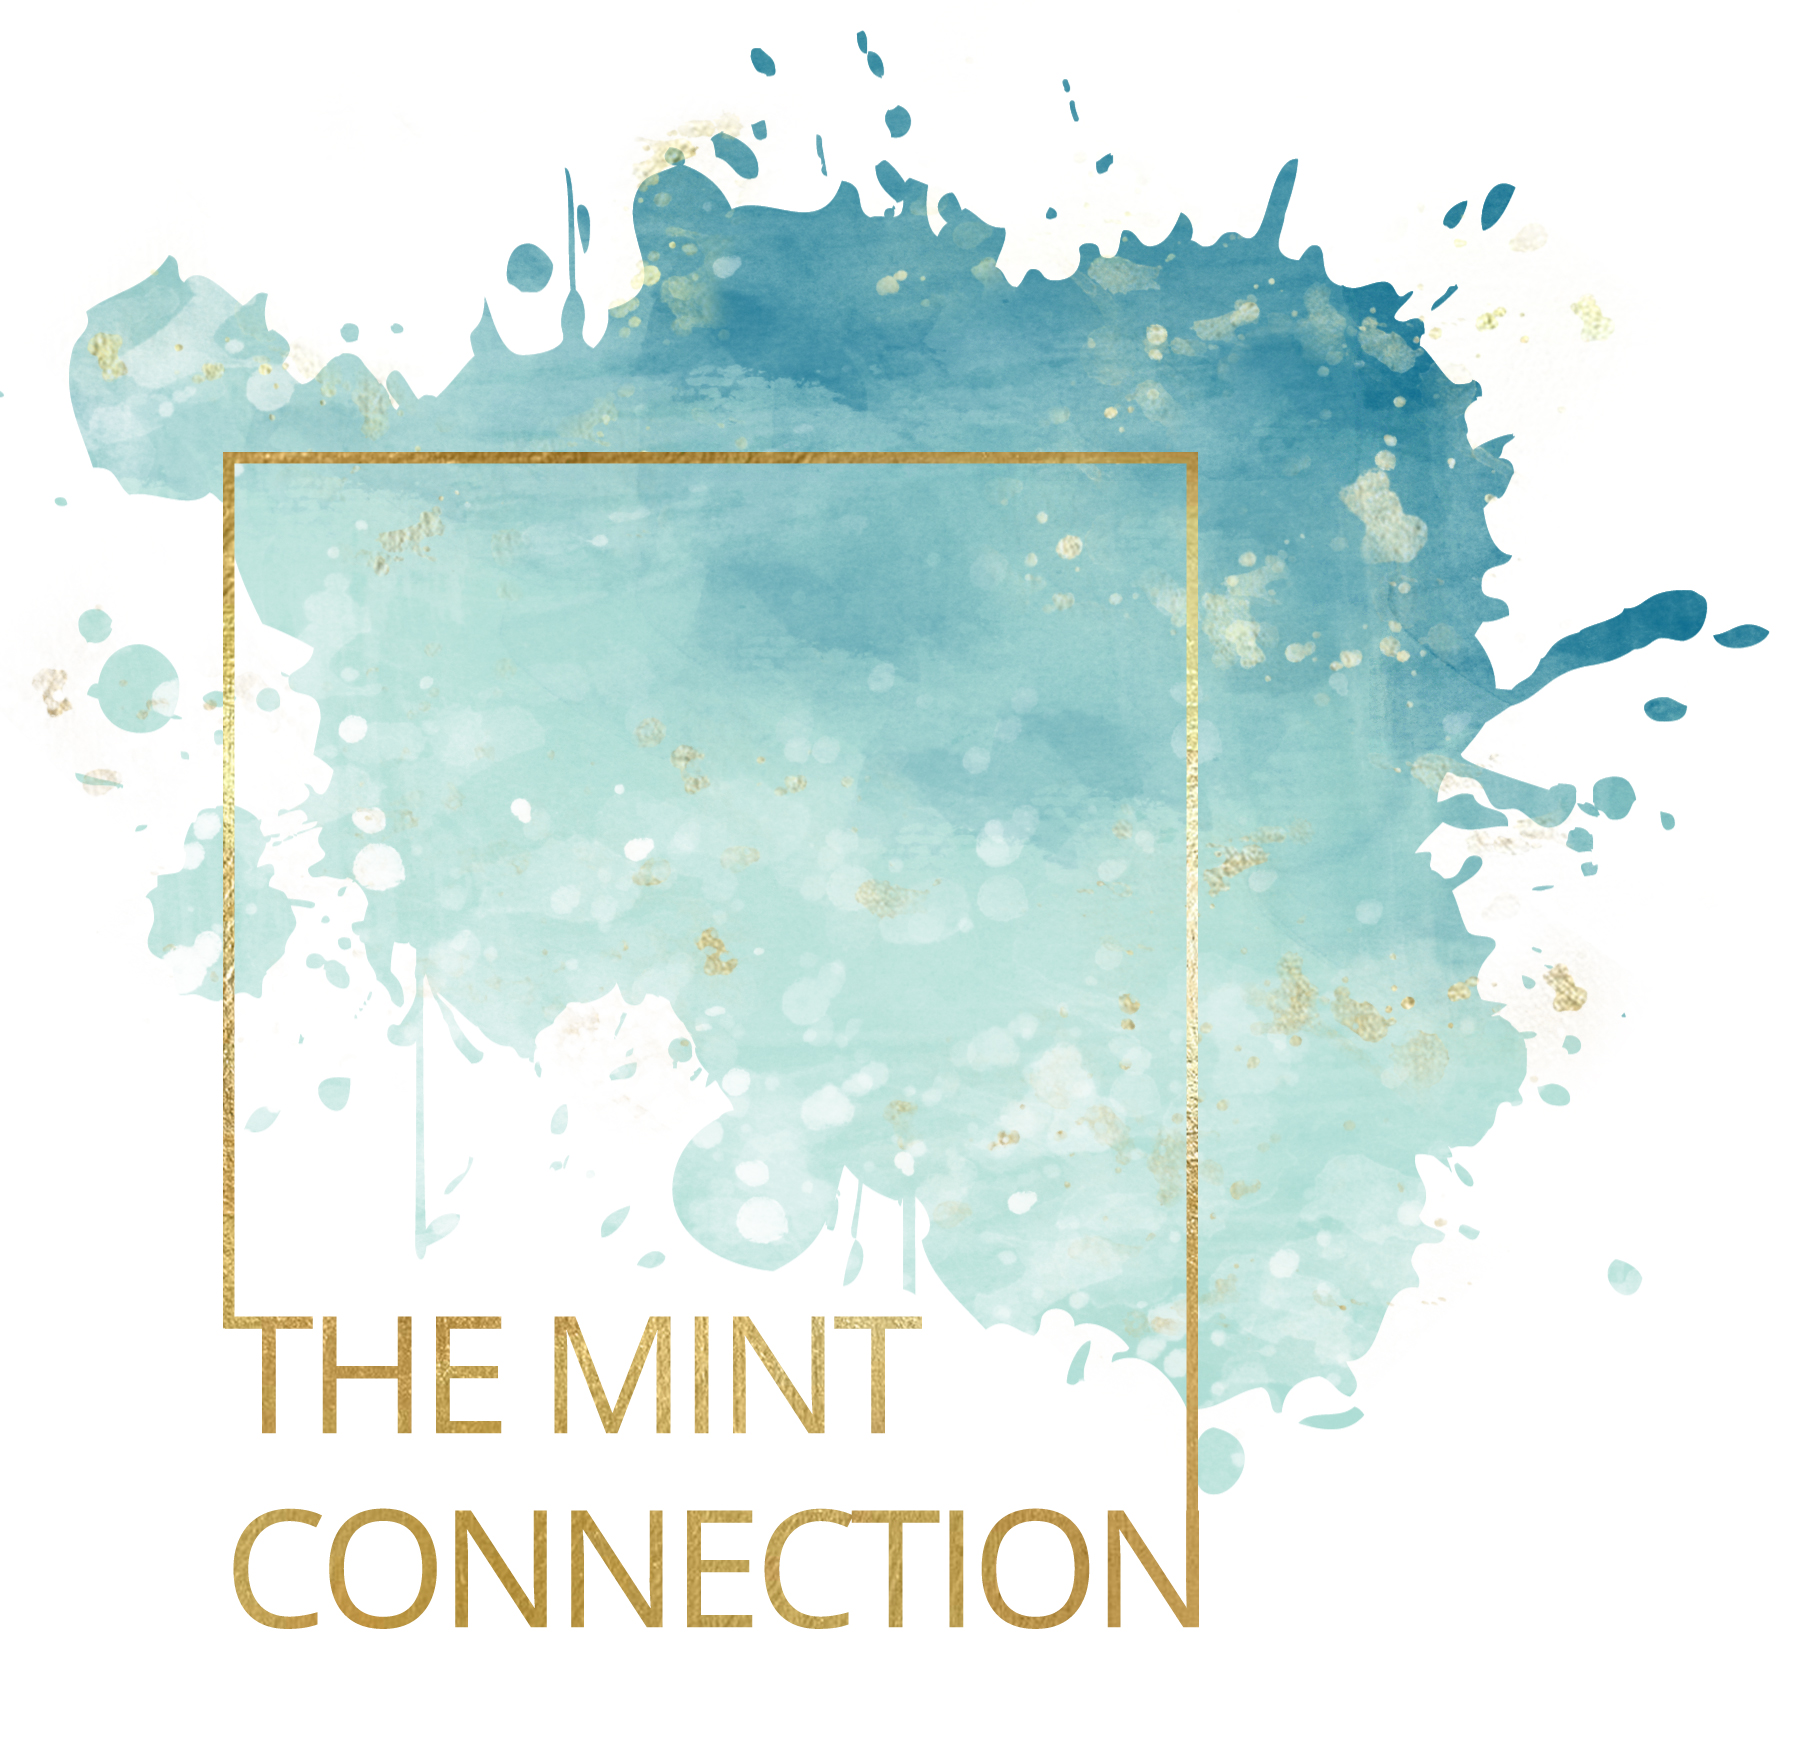 The Mint Connection